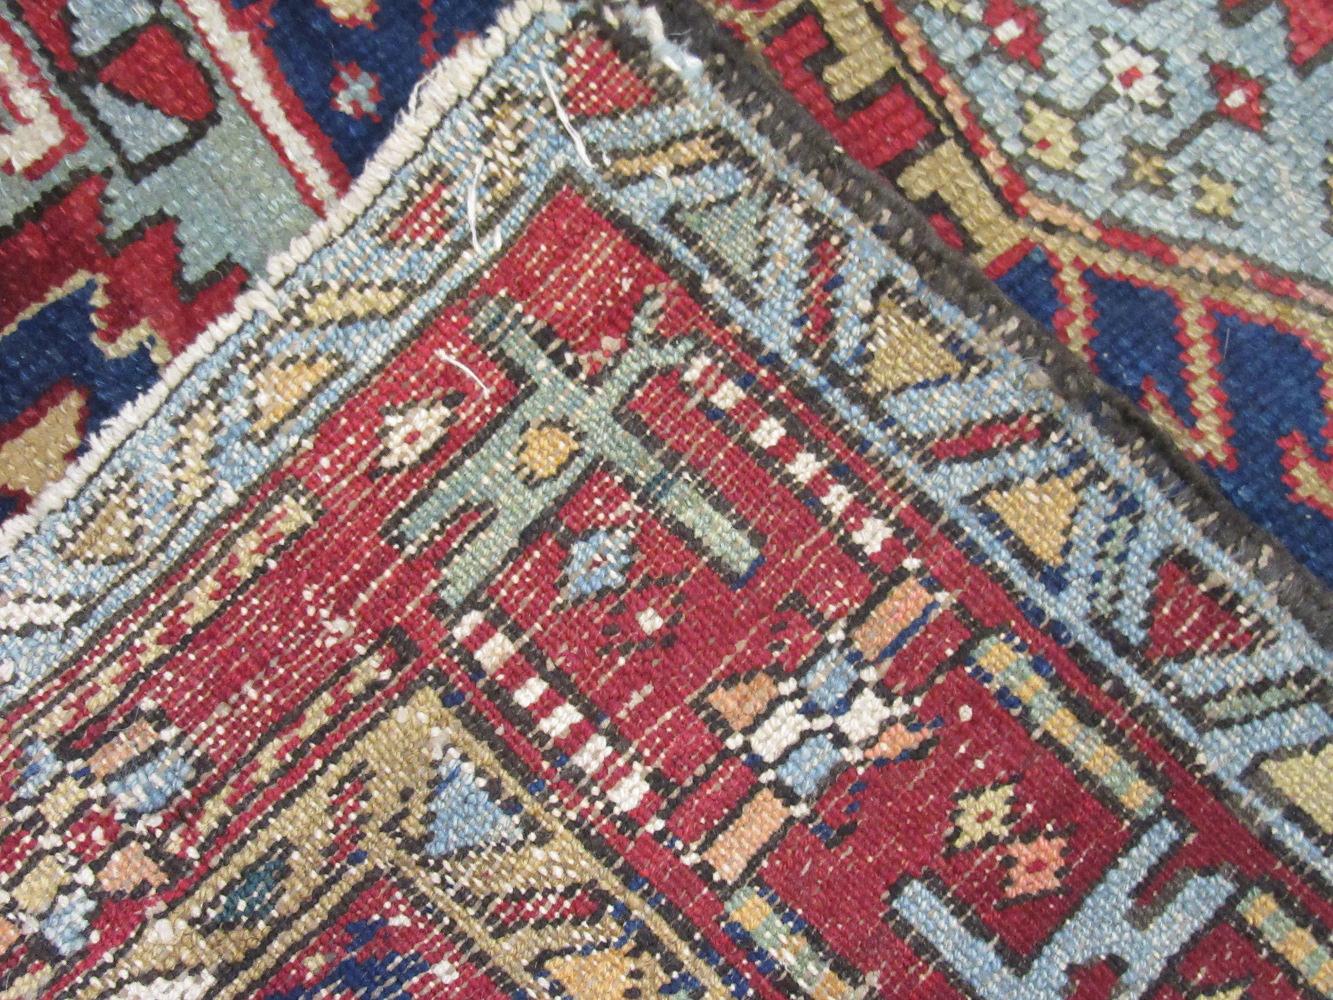 20th Century Small Antique Hand-Knotted Wool Persian Heriz Rug